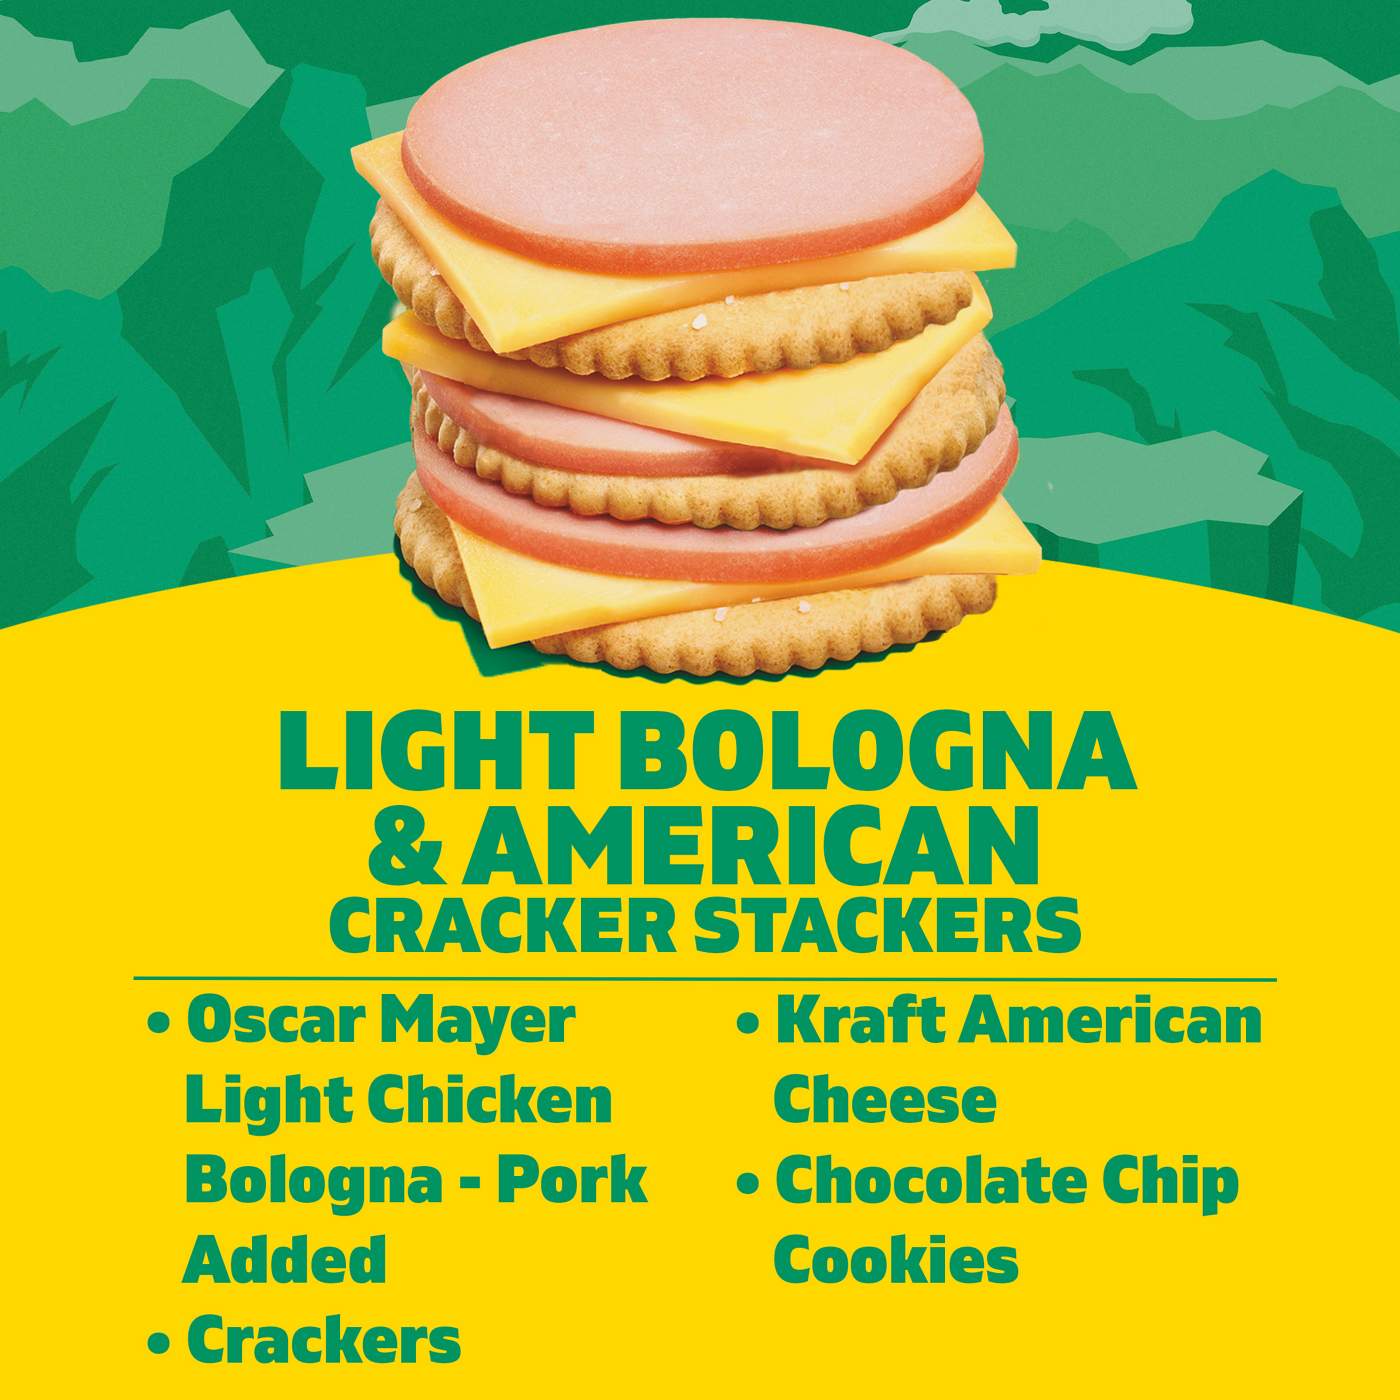 Lunchables Snack Kit - Light Bologna & American Cracker Stackers with Chocolate Chip Cookies; image 3 of 4